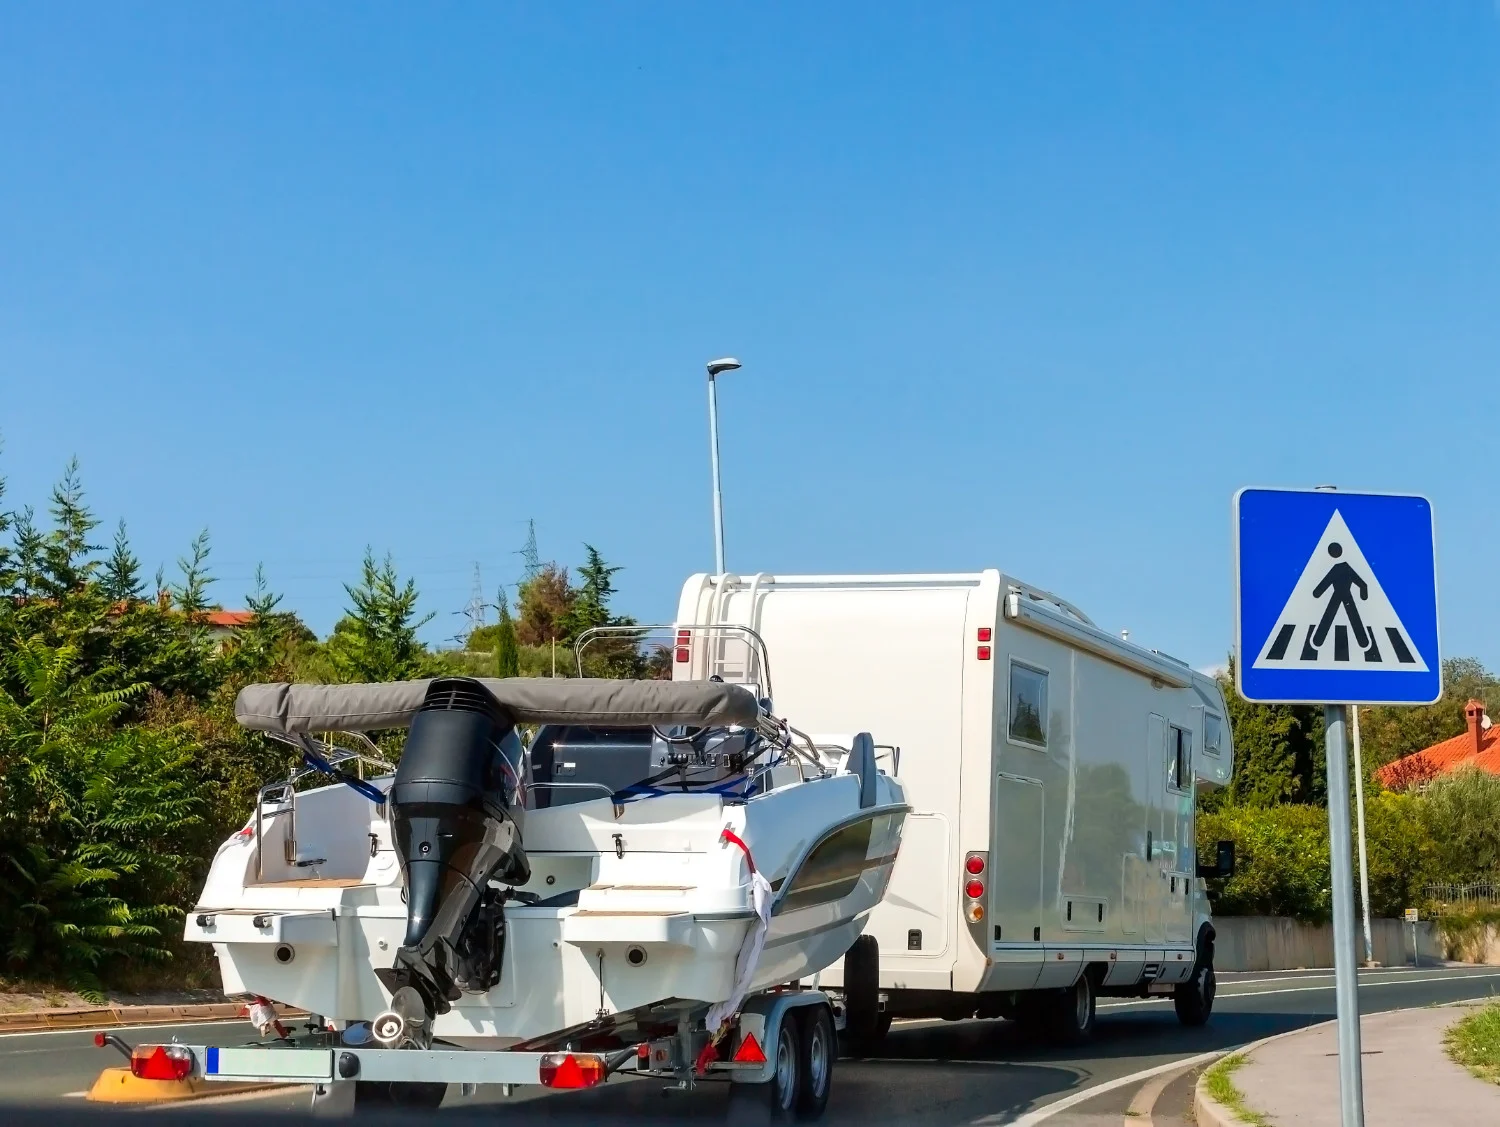 If towing a trailer, a reduced speed limit in Croatia of 90 km/h on motorways and 80 km/h on rural roads applies. 